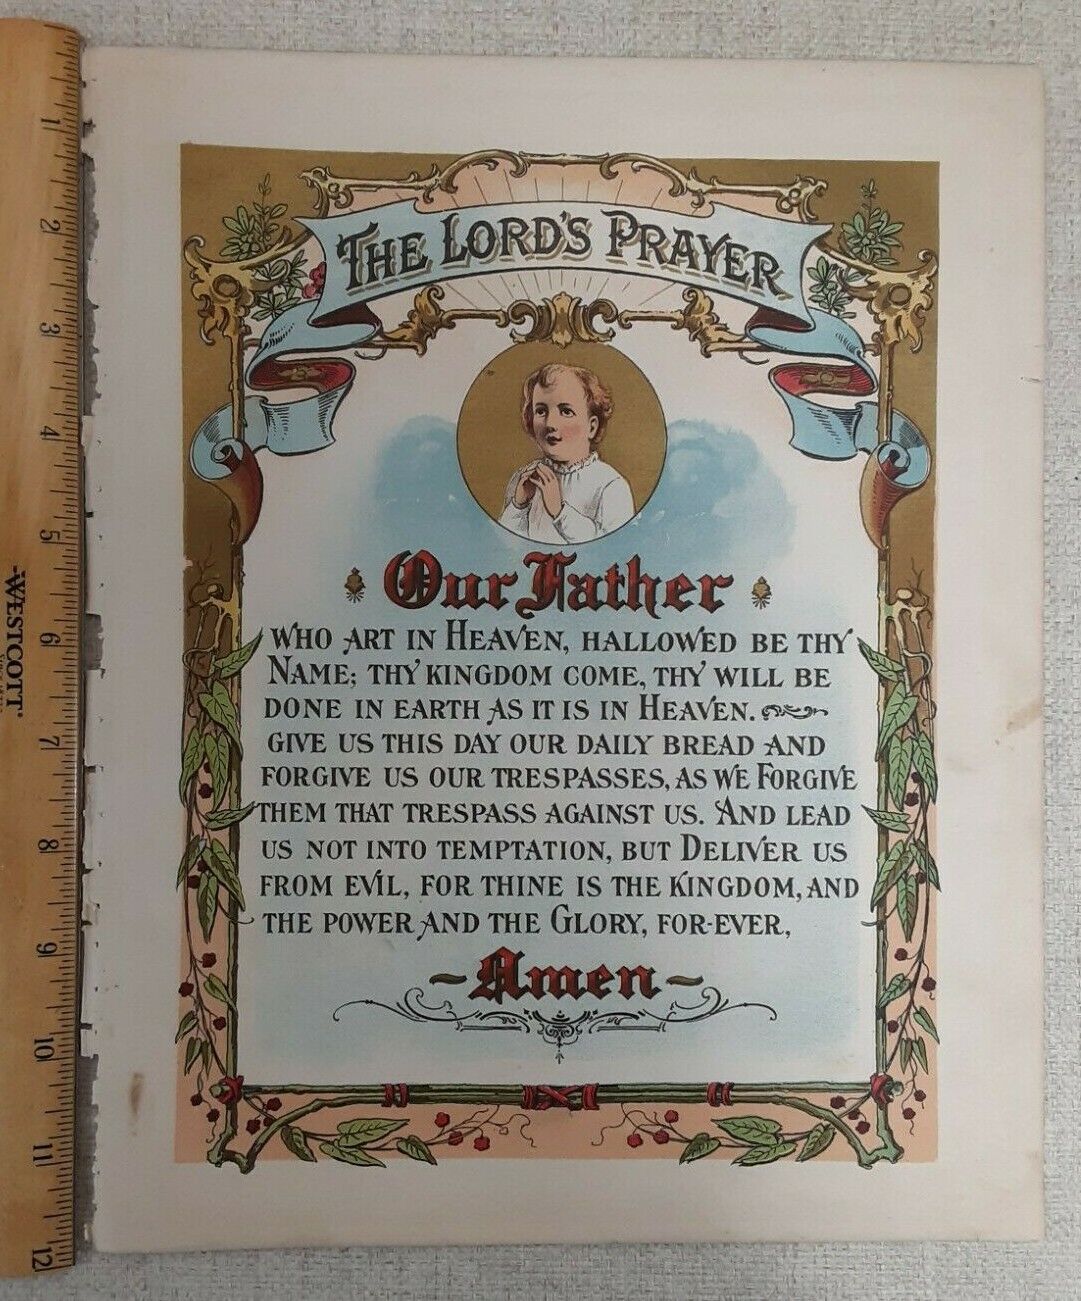 Authentic Plate From 1896 Bible - The Lord\'s Prayer Metallic Gold Gilding 